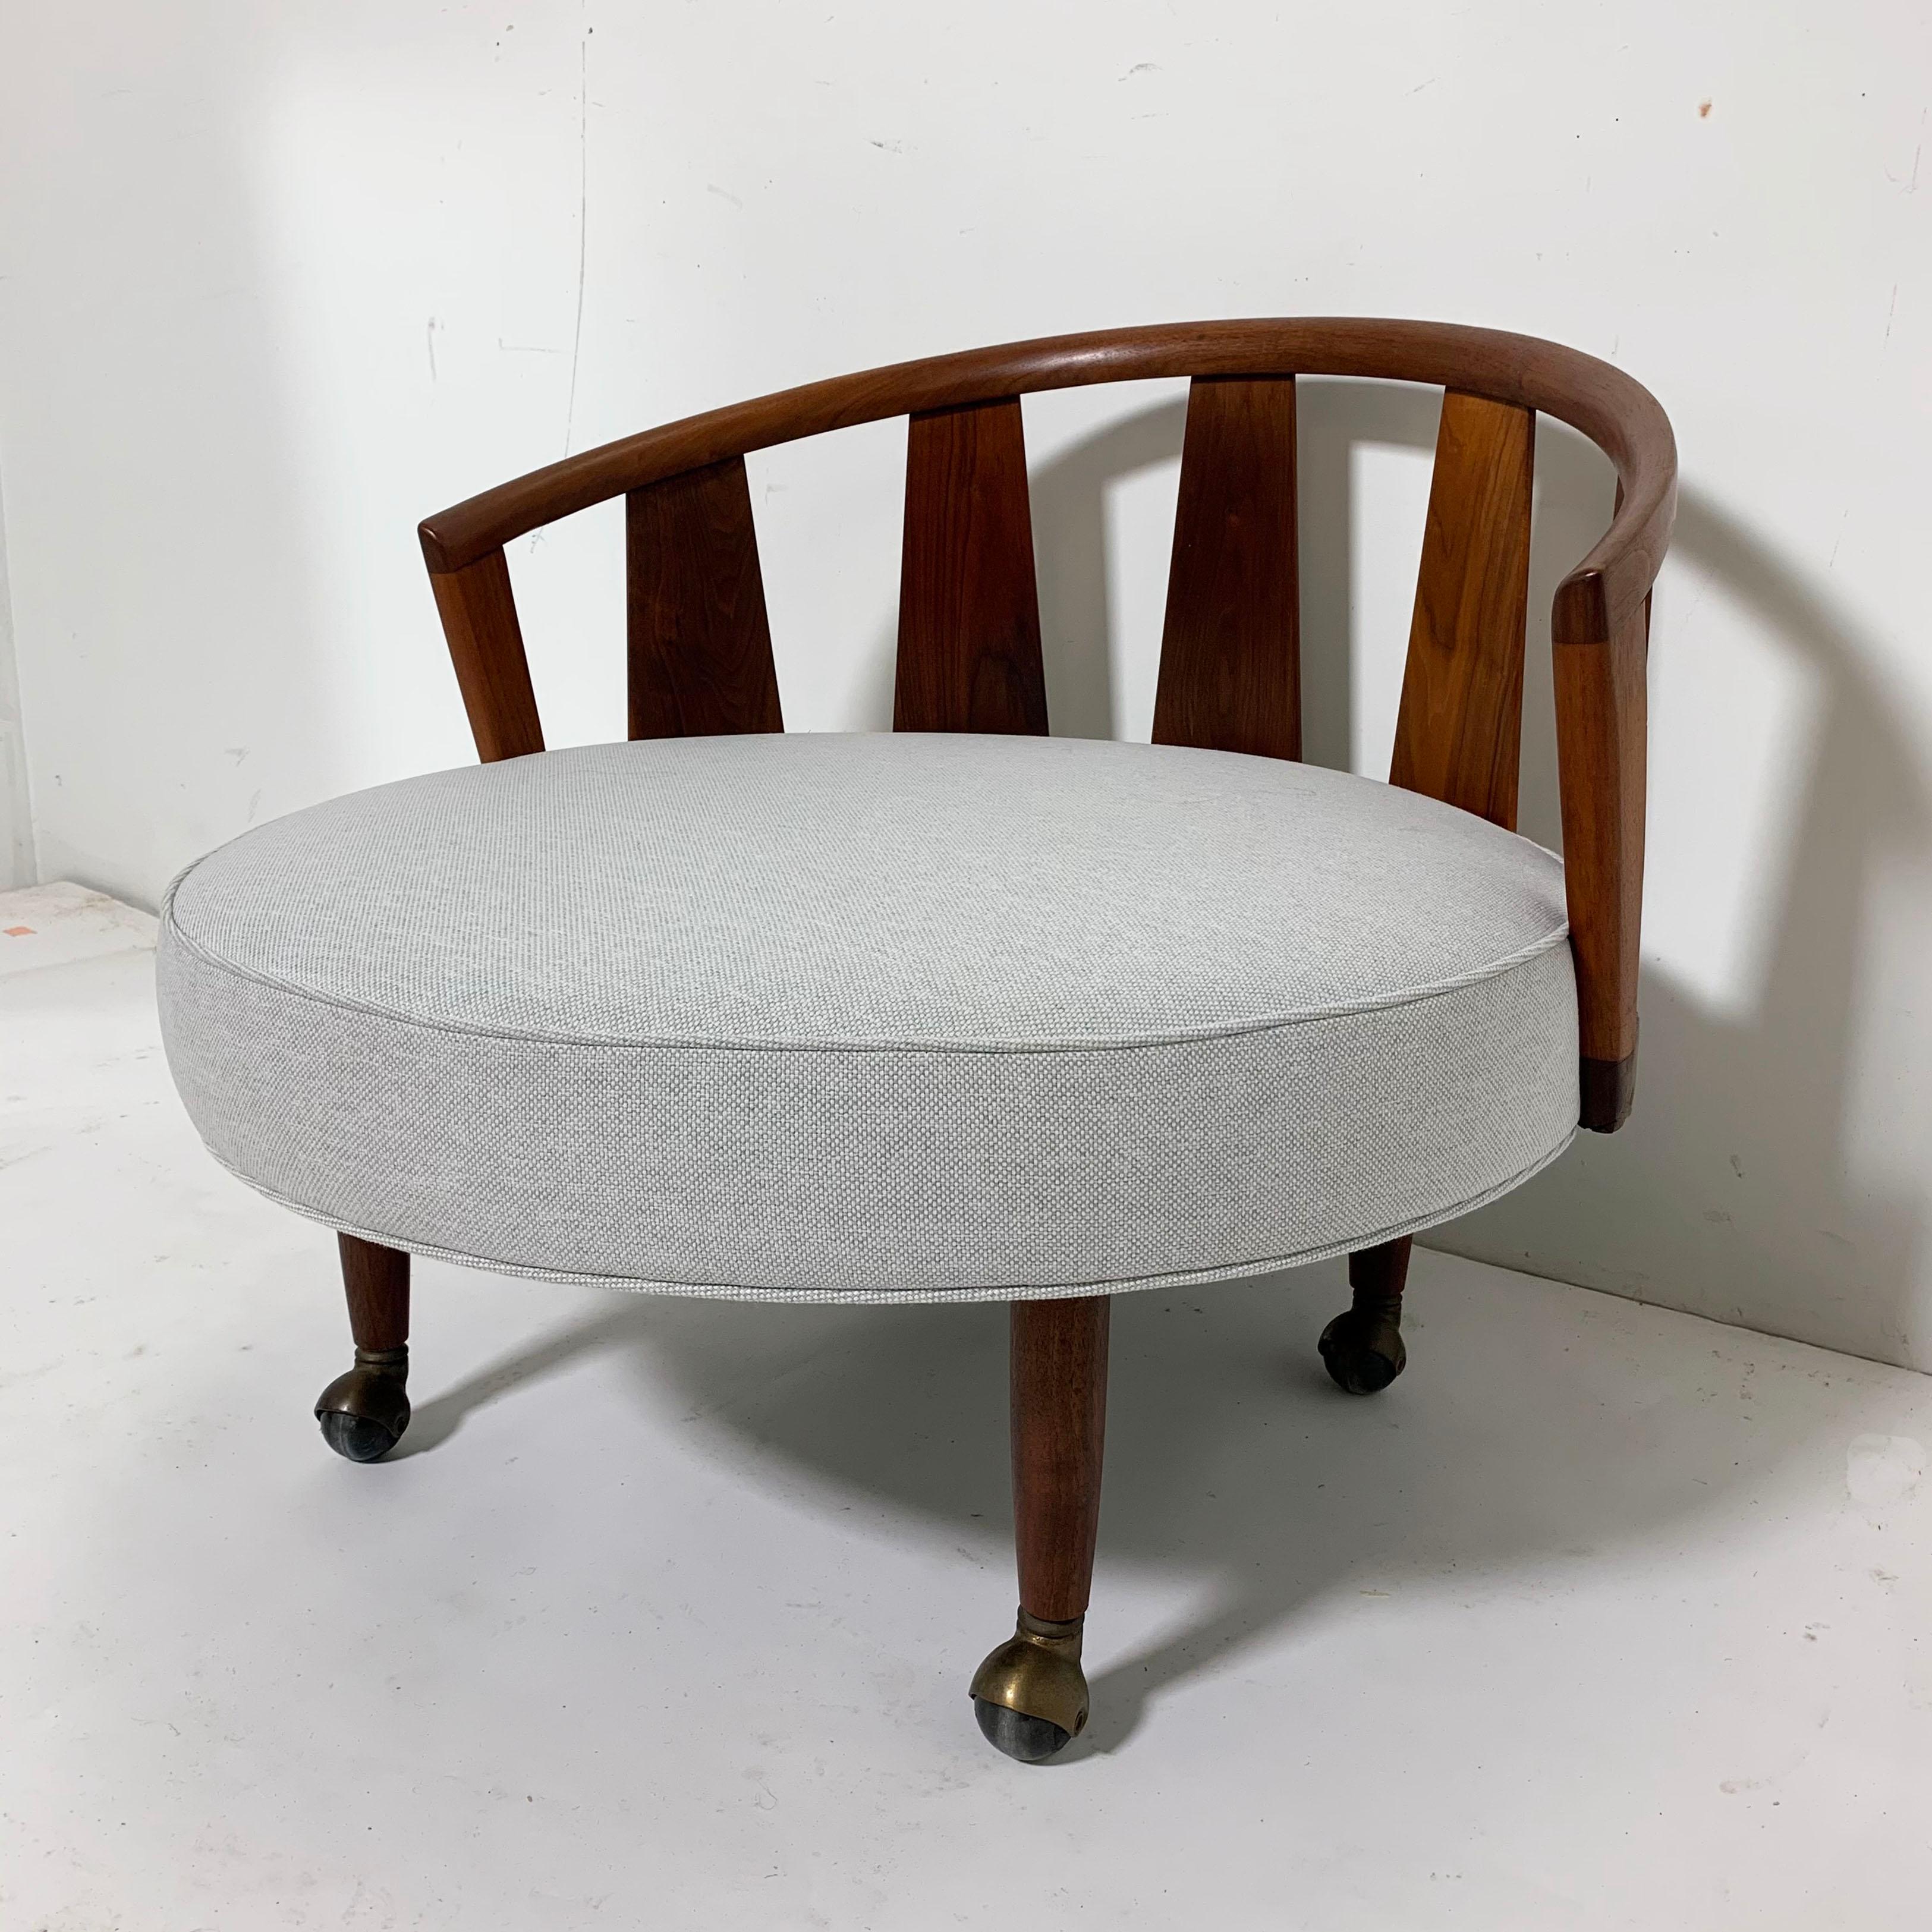 Adrian Pearsall for Craft Associates “Havana” lounge chair on castors, circa 1960s. This rare version features the walnut backrest and has been freshly reupholstered with Maharam fabric.